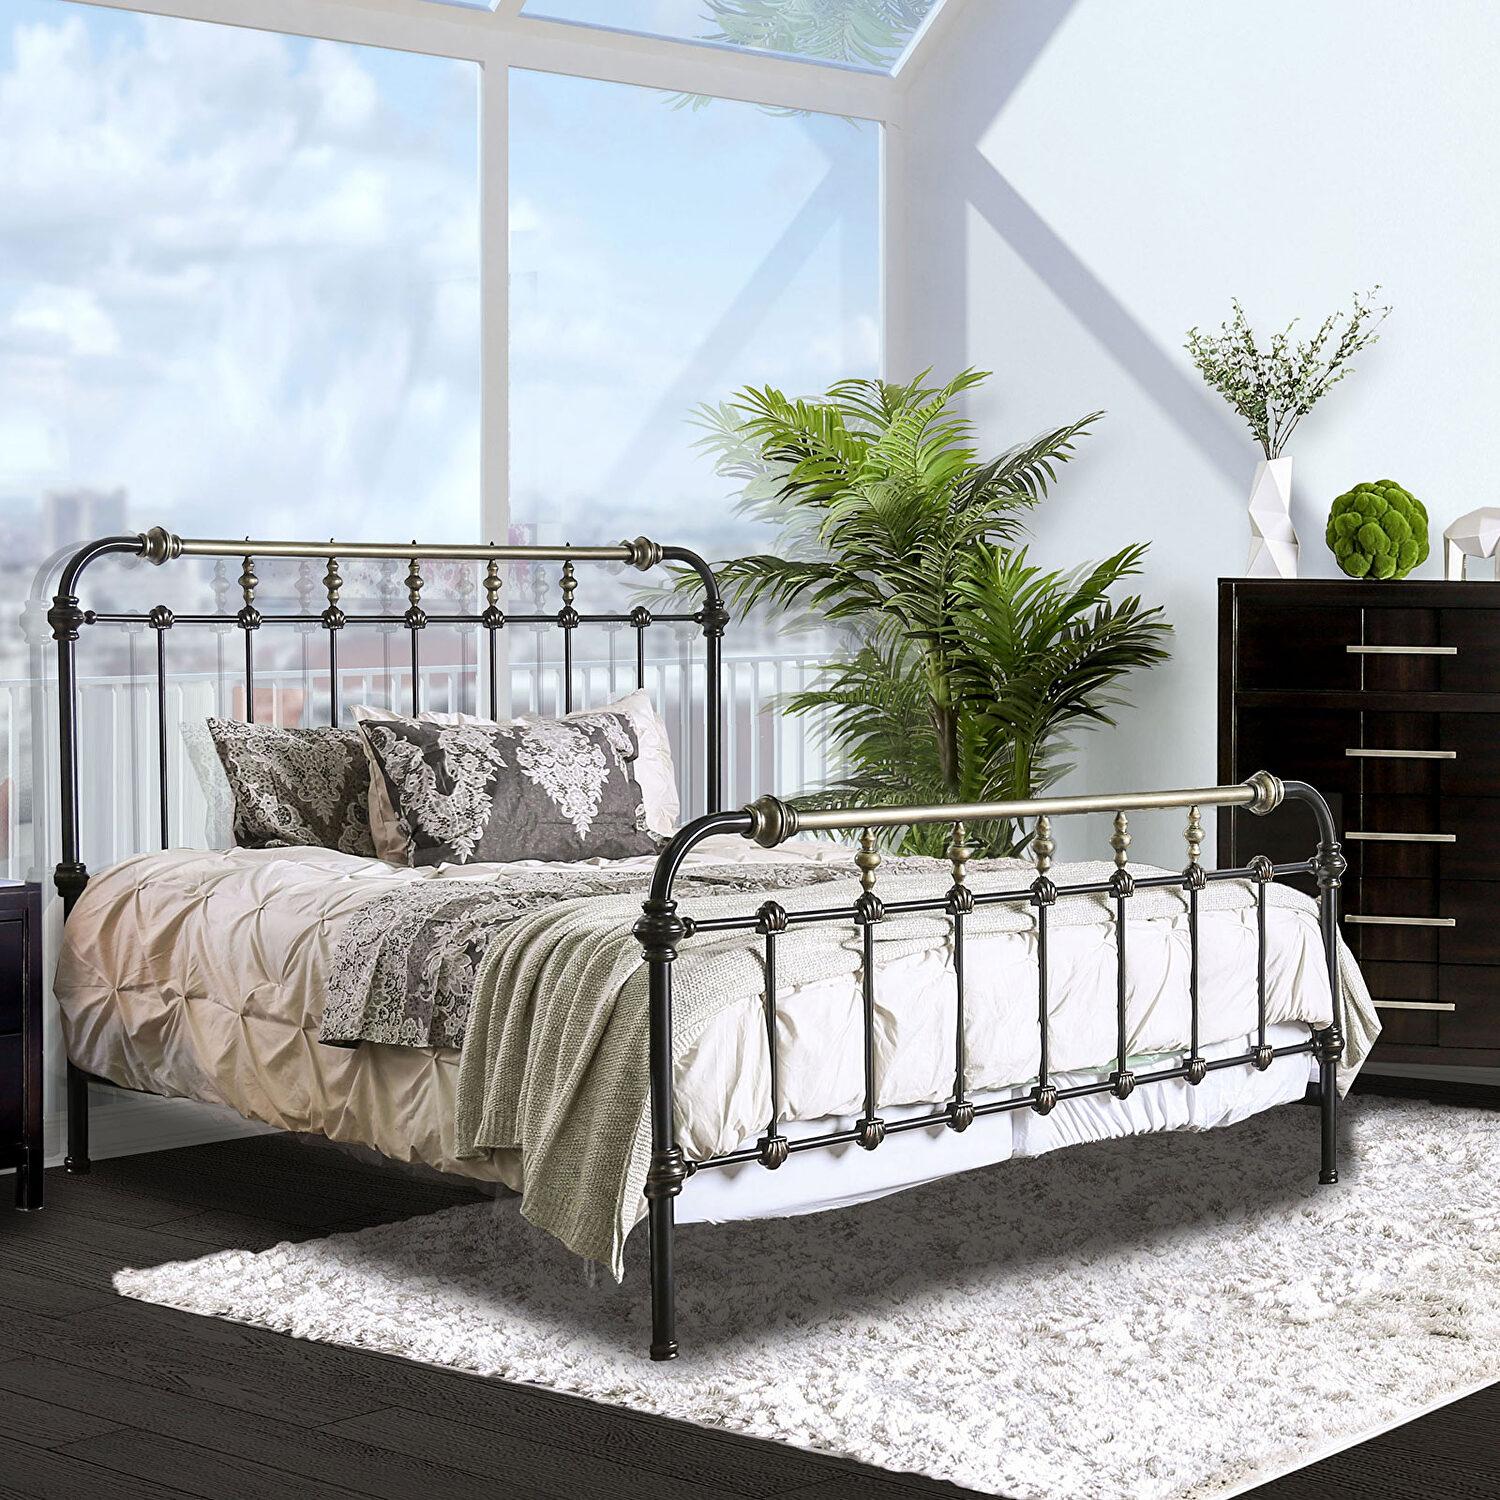 Transitional Metal Bed CM7733-F Riana CM7733-F in Antique Black 